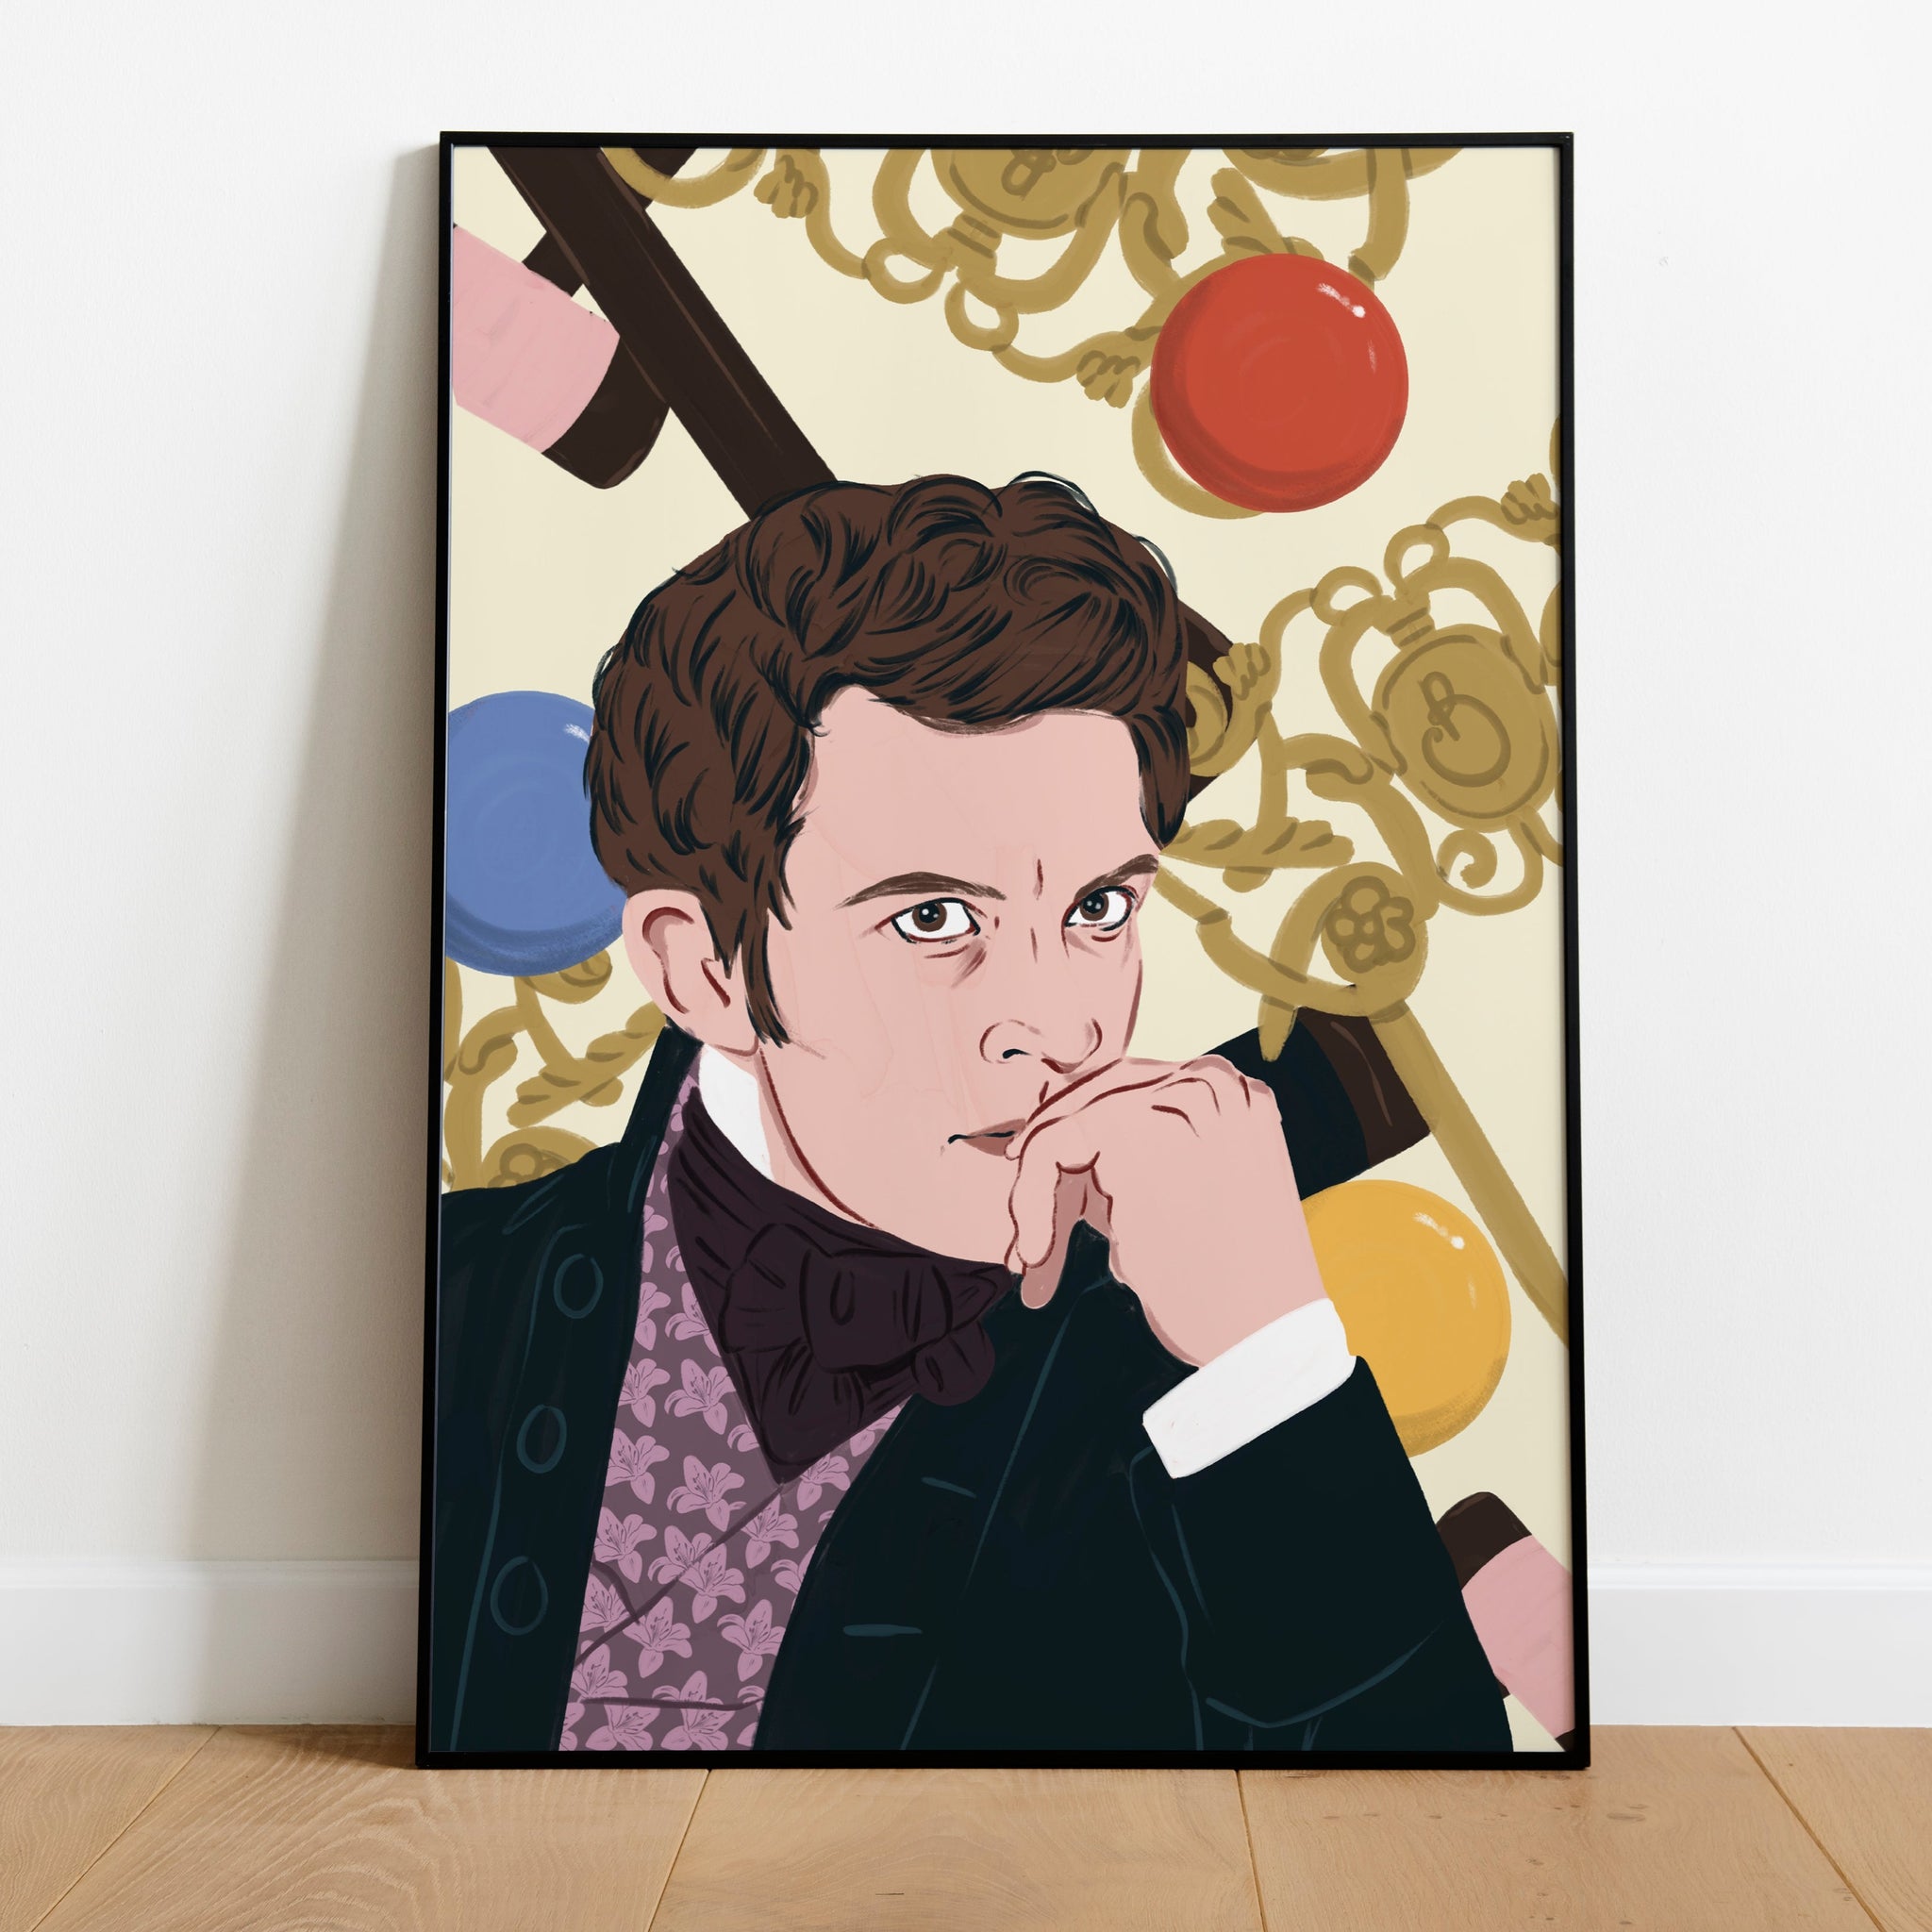 A framed image of an art print featuring an illustration of jonathan bailey as anthony bridgerton from the bridgerton series. The background is cream and features a croquet motif.